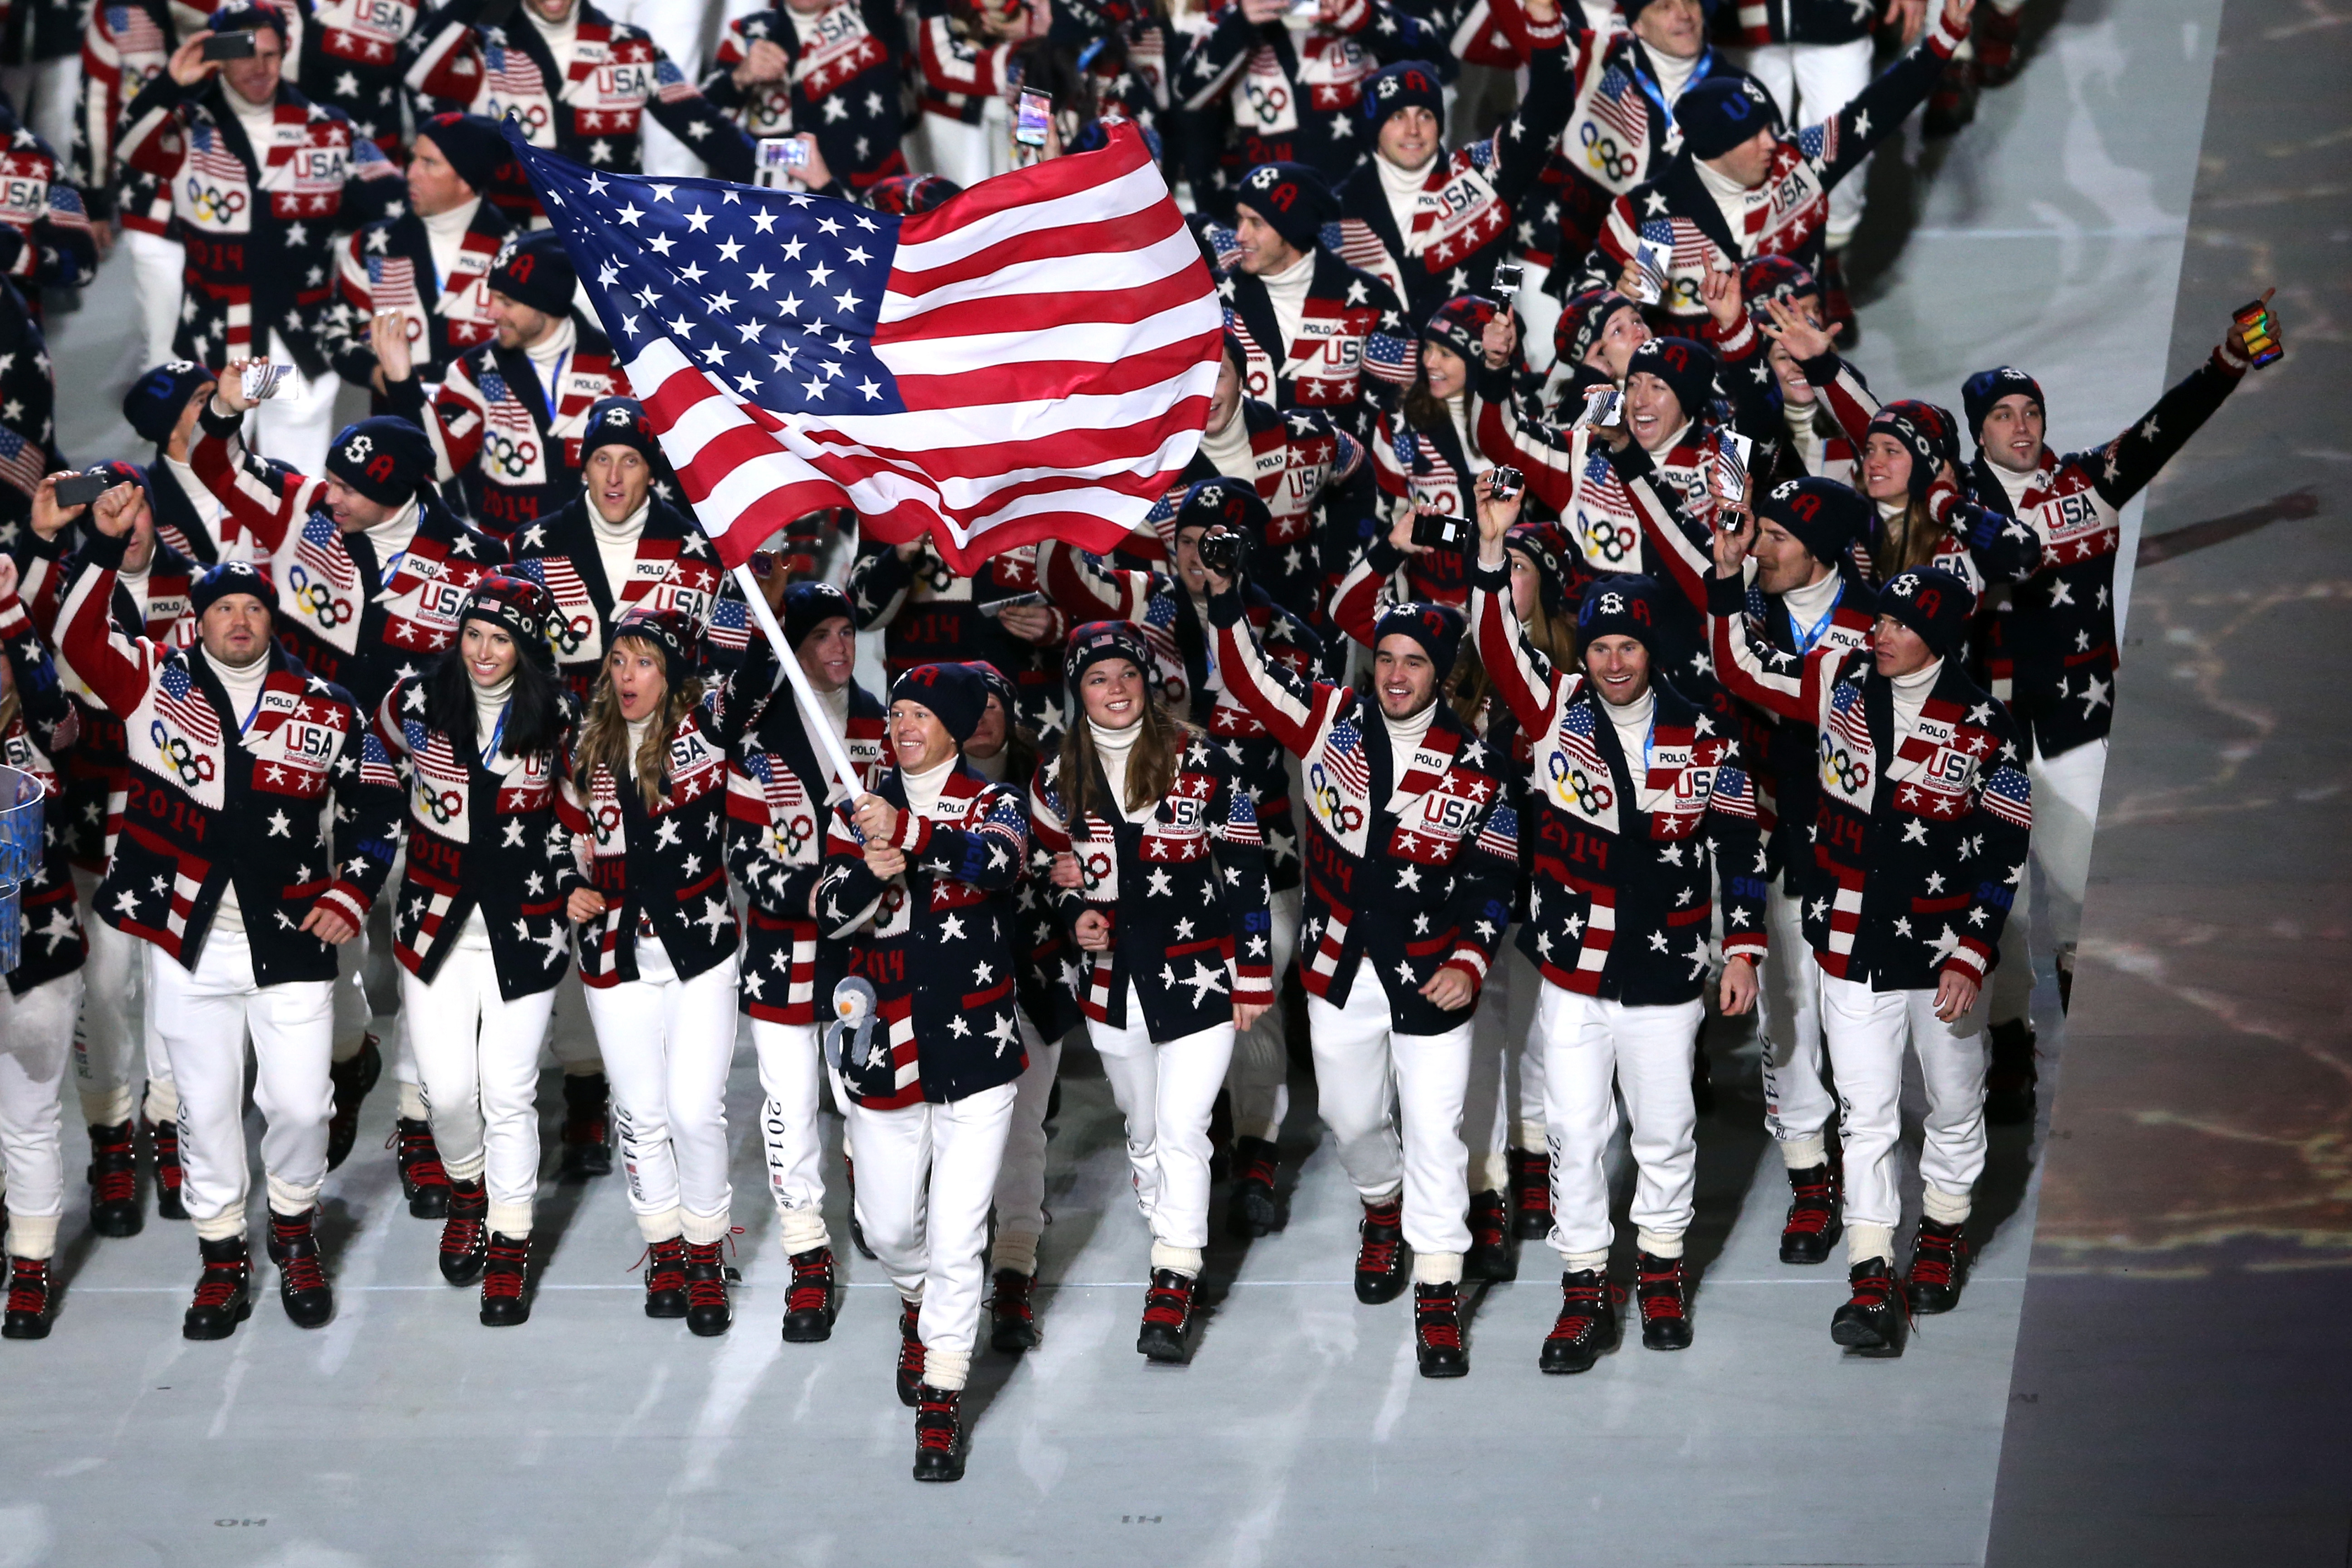 Team USA Olympic Uniforms Through the Years: A Photo History